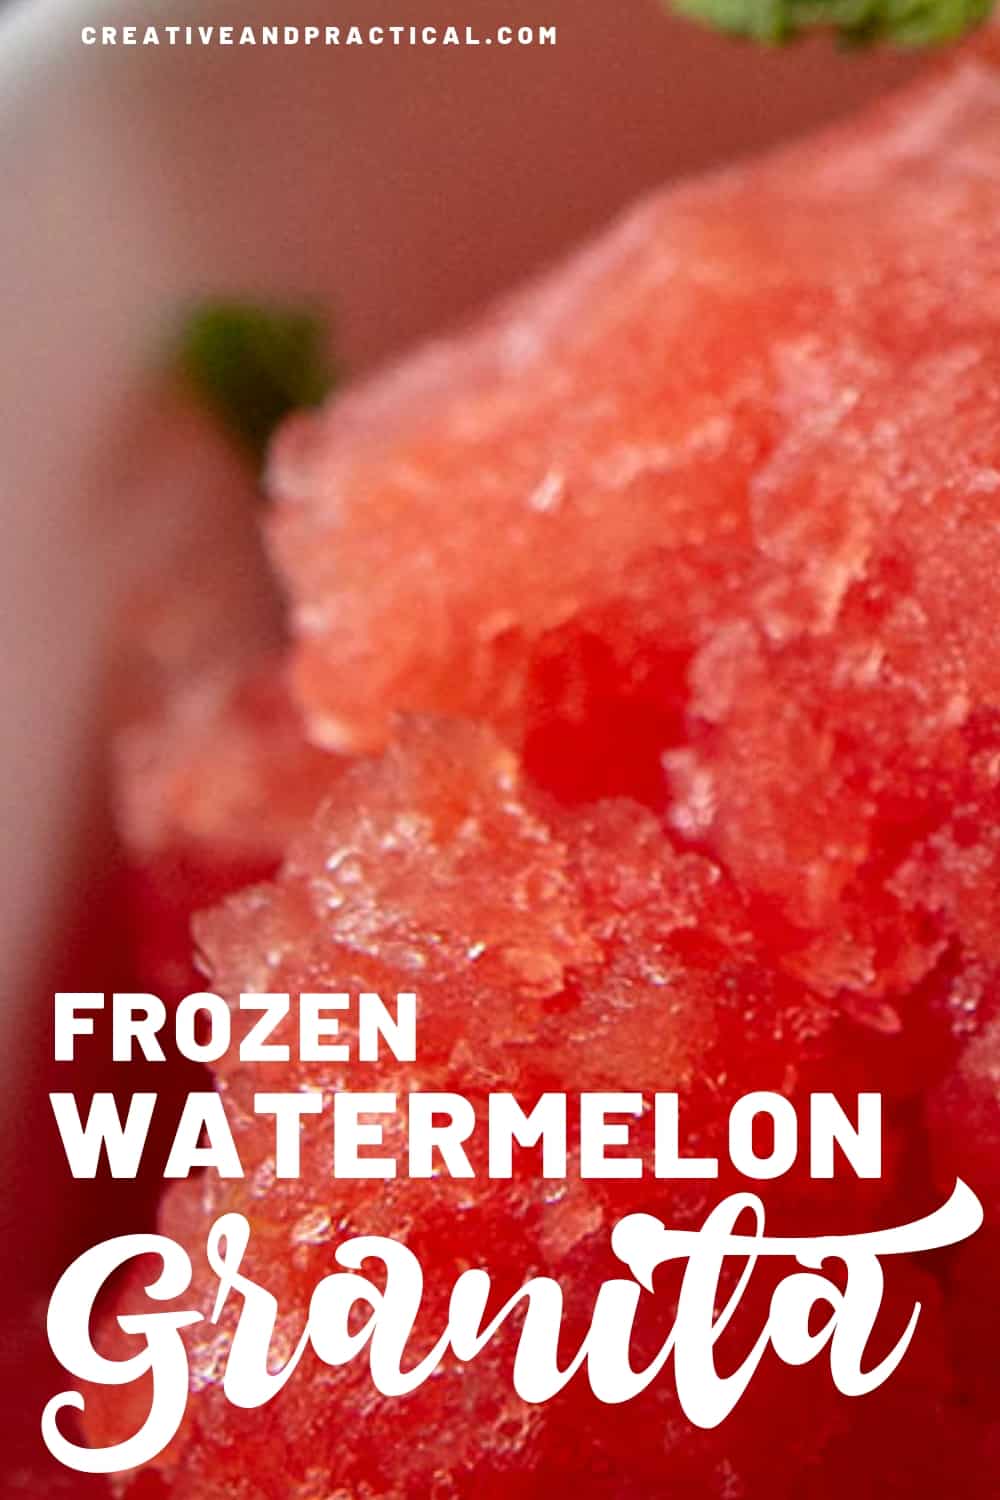 You'll only need 3 ingredients to make this easy, frozen summer treat.  Watermelon Granita is a super refreshing frozen dessert. Perfect for hot summer days. PS: You don't even need an ice cream maker. #granita #watermelongranita #watermelon #lemon #frozendesssert #dessert #sorbet #italiandessert | cheerfulcook.com via @cheerfulcook